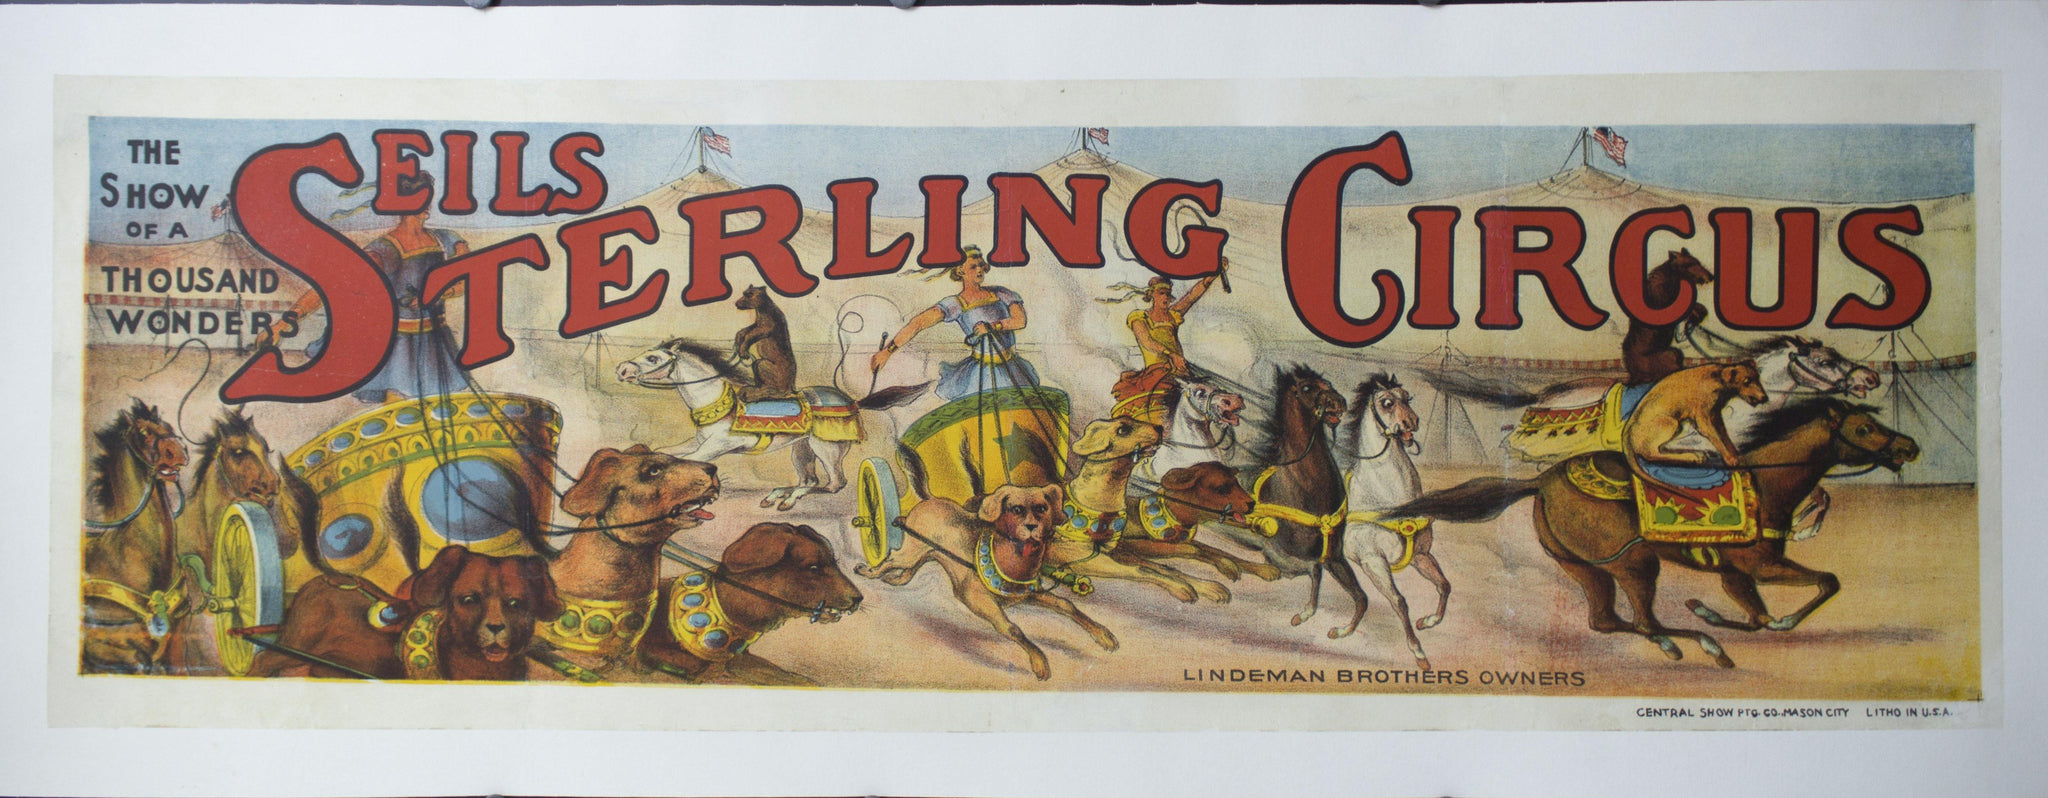 c. 1920 Seils Sterling Circus | The Show of a Thousand Wonders - Golden Age Posters